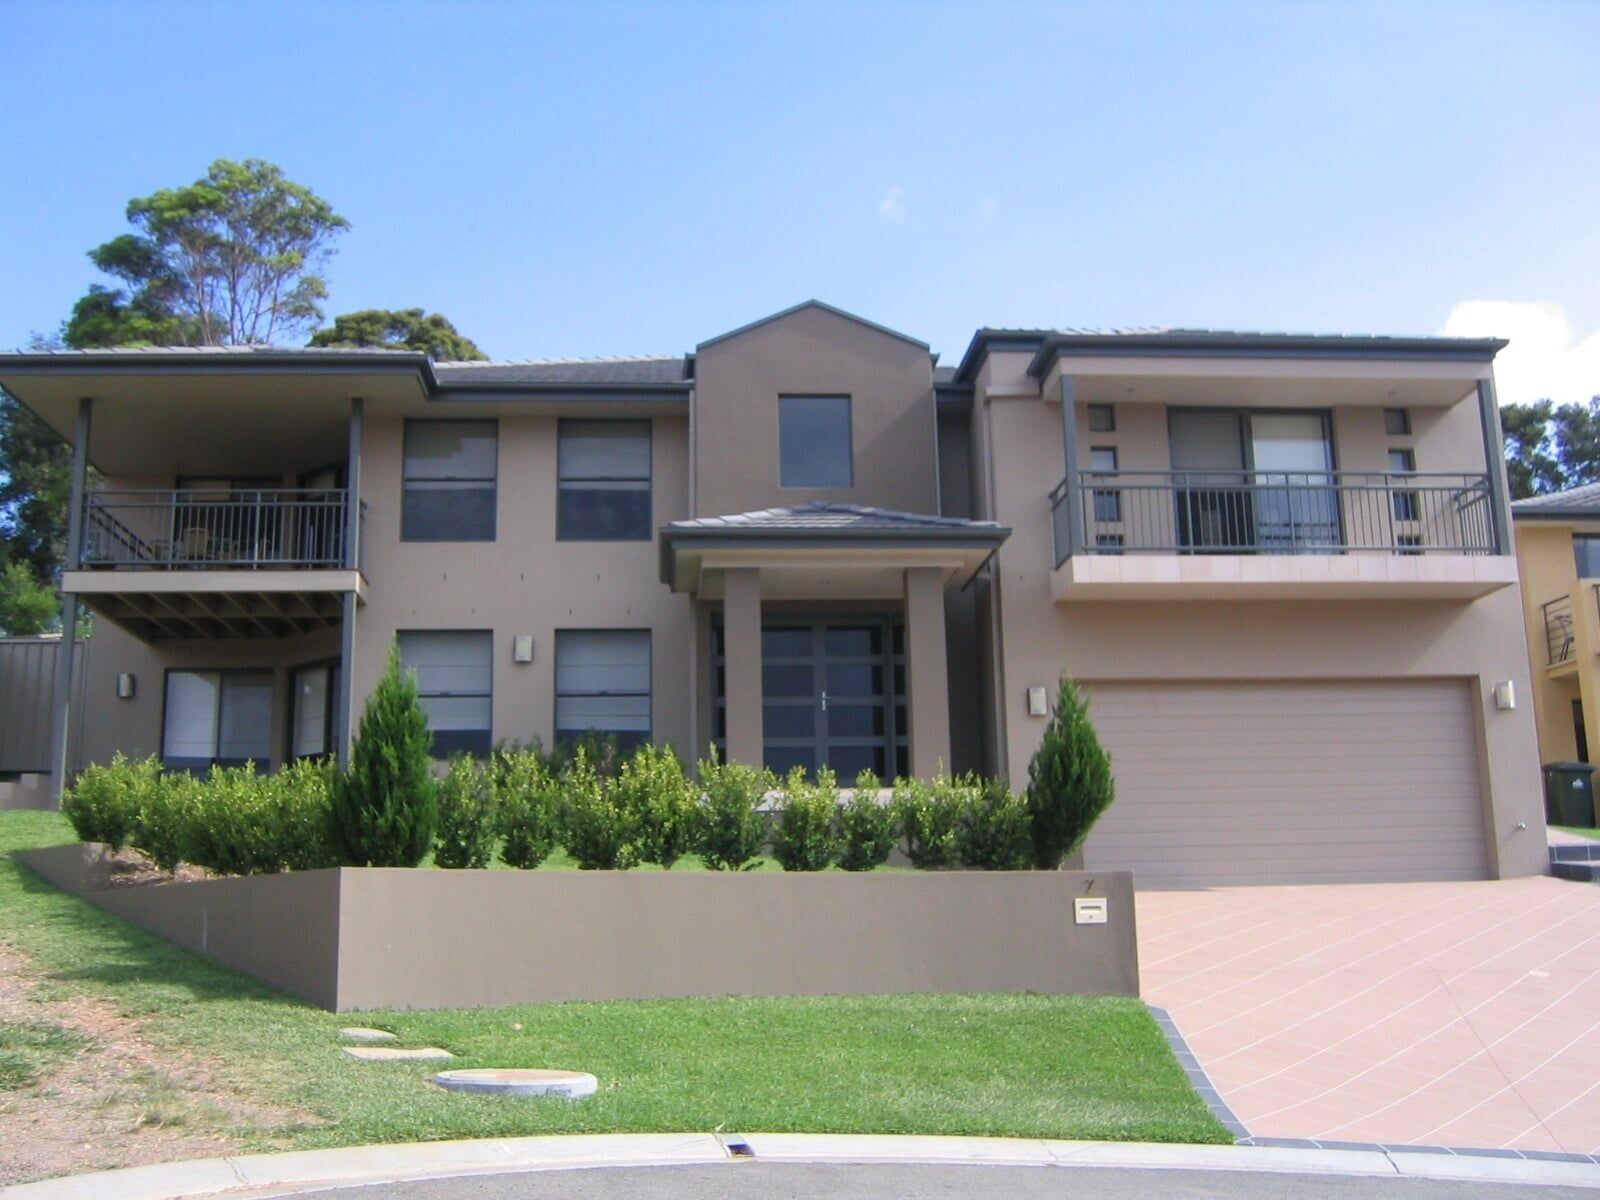 Quality Home Construction — Aspex Construction in Port Macquarie, NSW